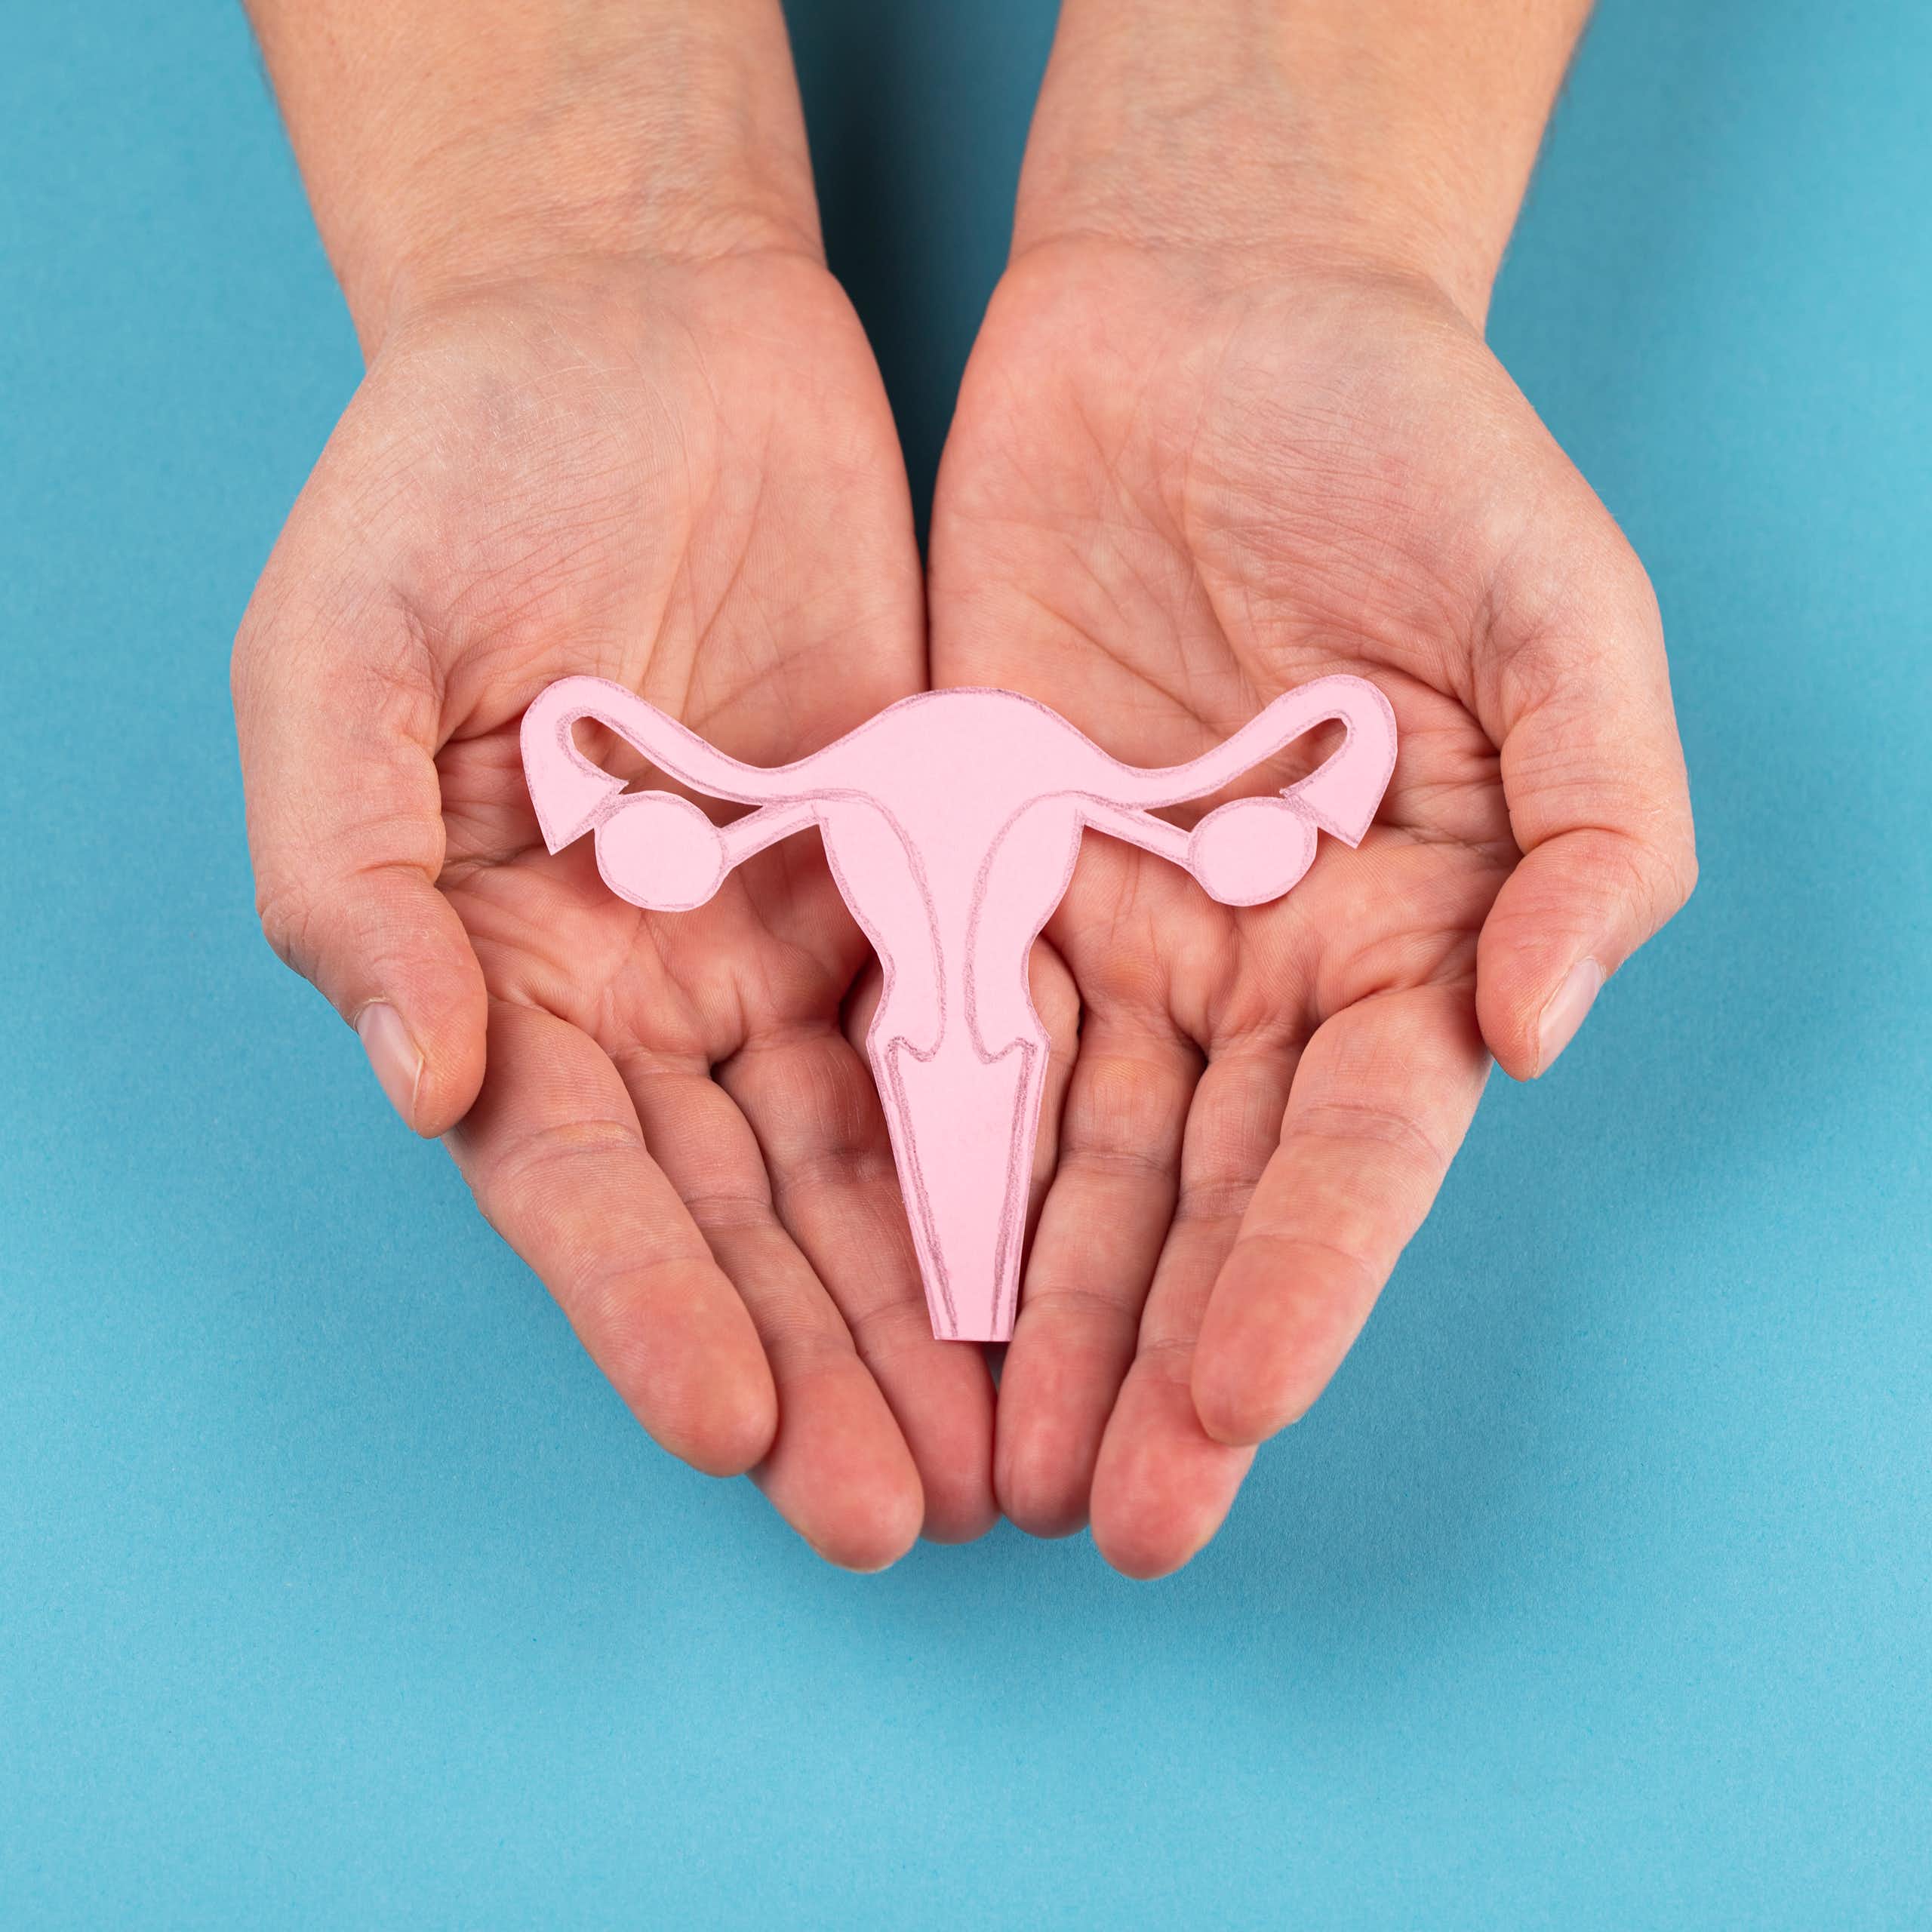 Female reproductive system in hands isolated on blue background